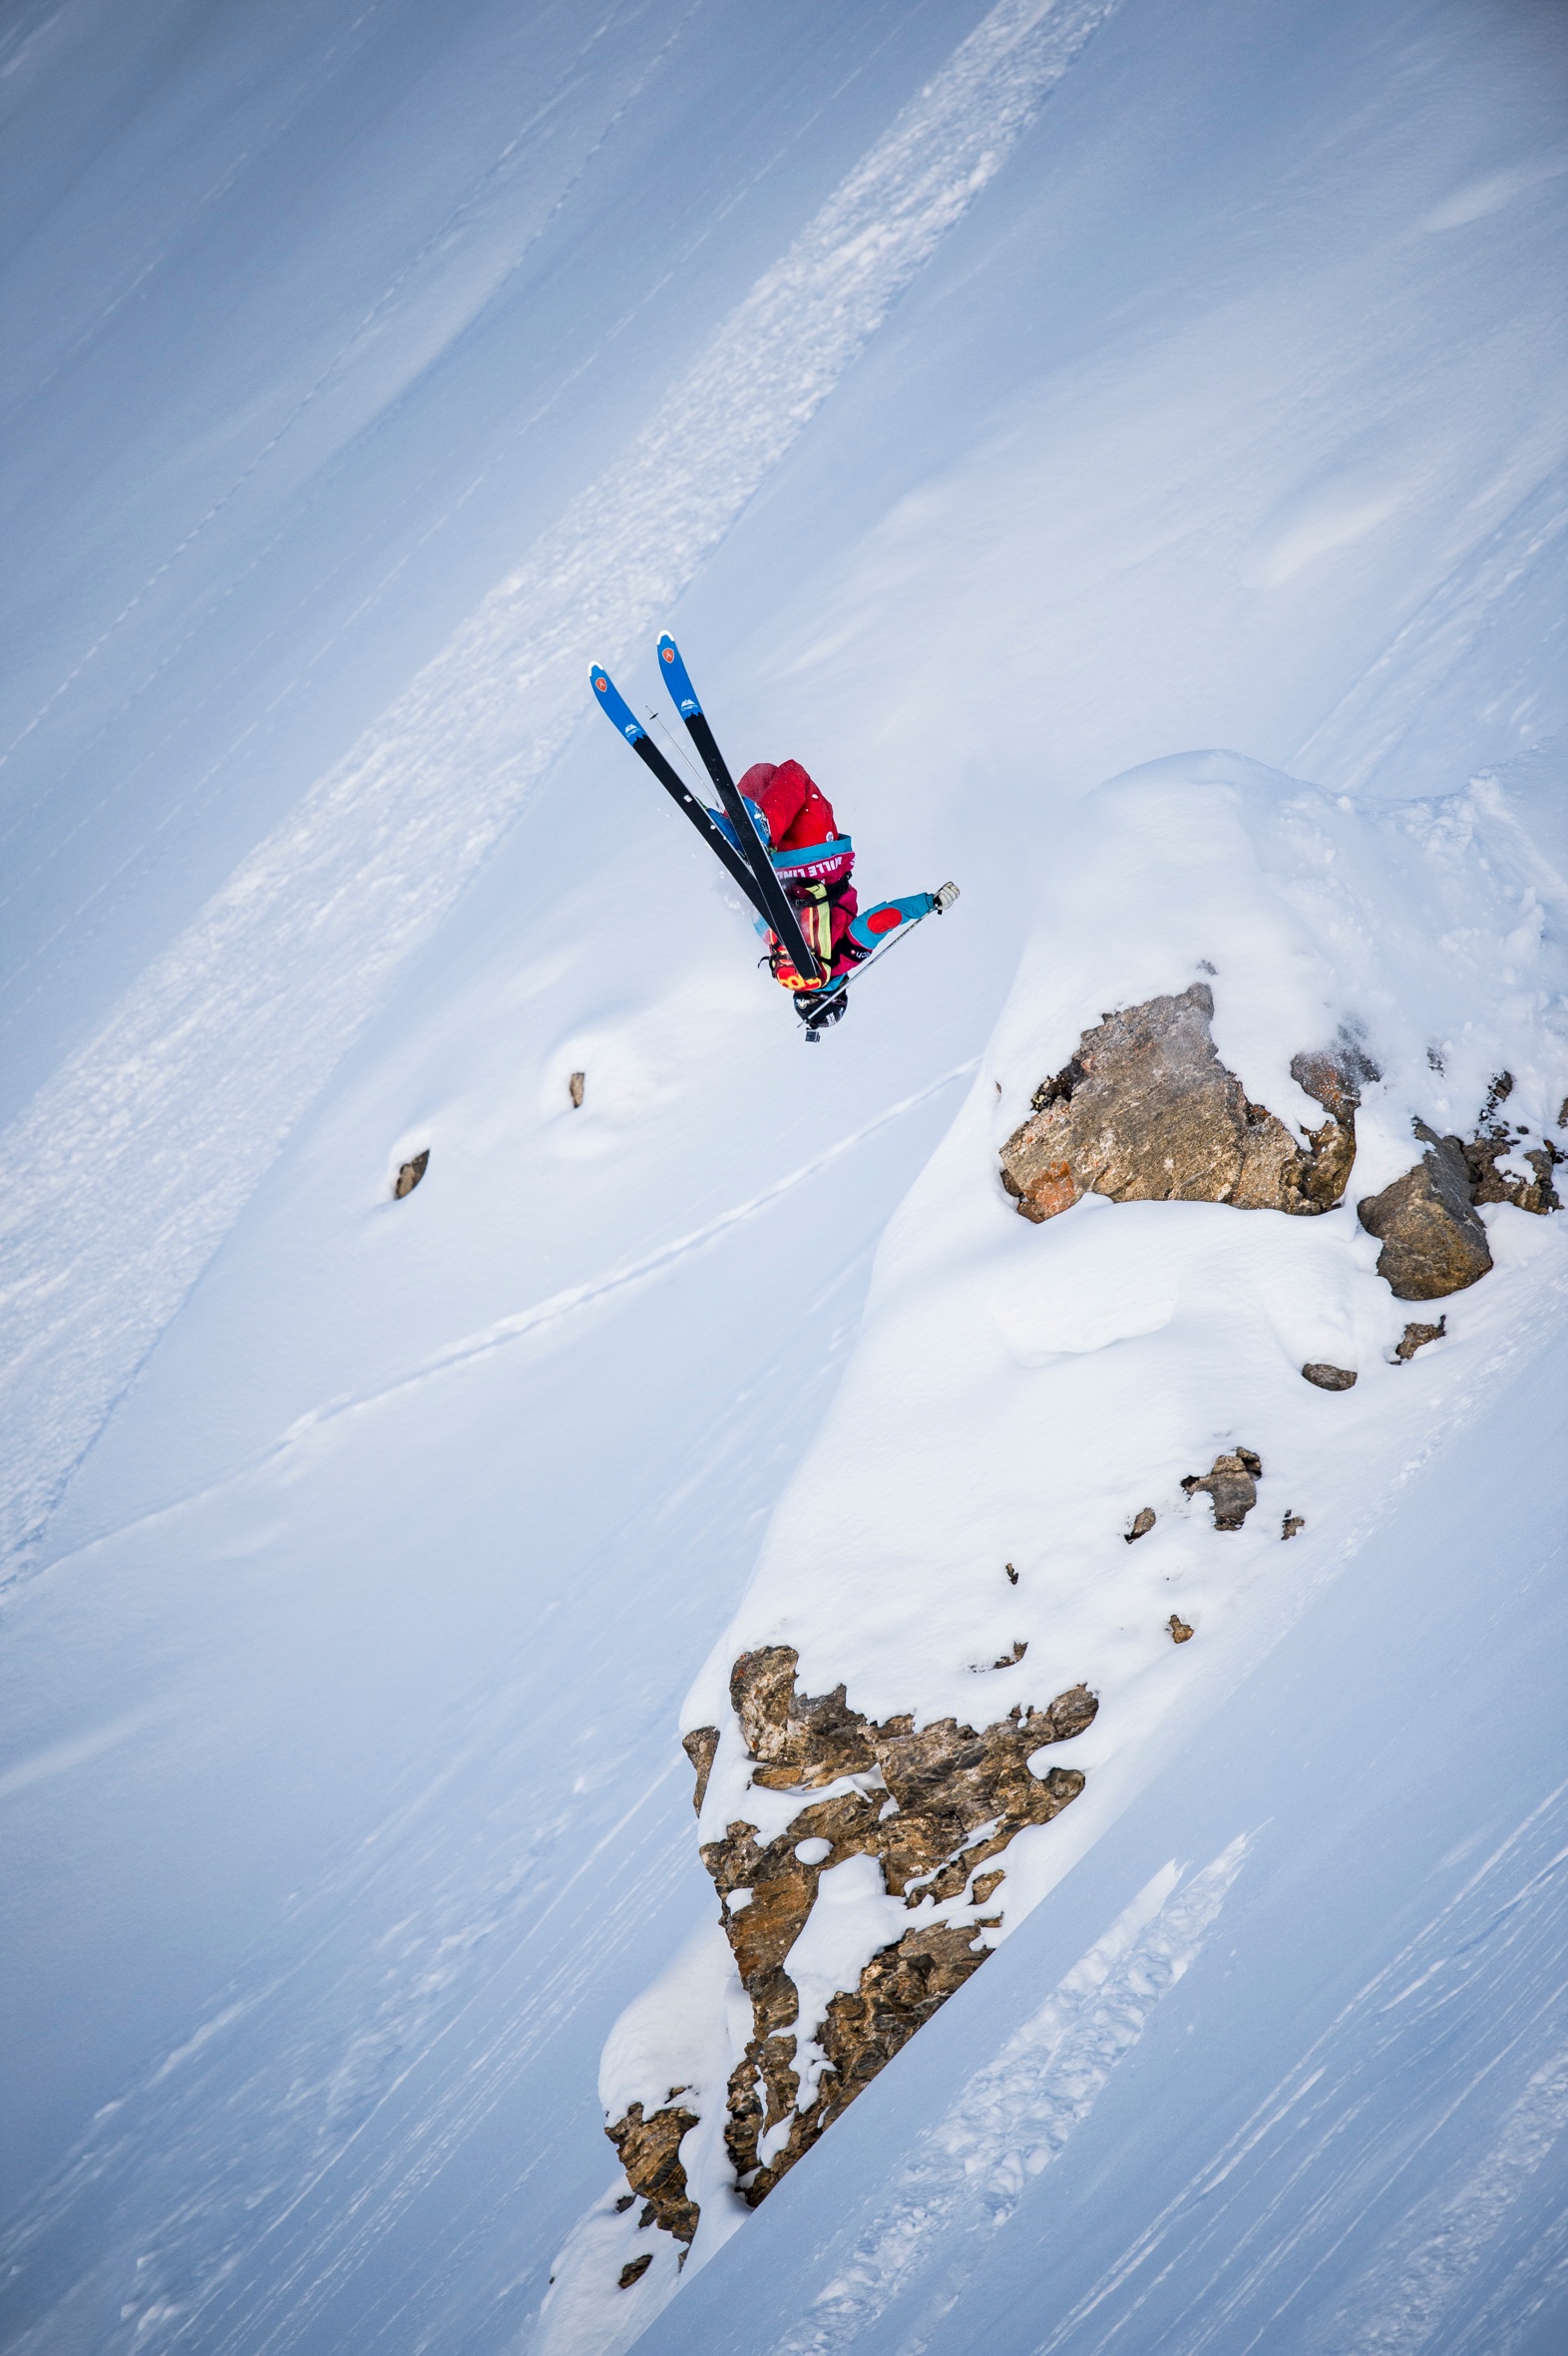 Swatch Freeride World Tour by The North Face 2014: The best riders on the best mountains in the ultimate freeride competition. In 2014, the Swatch Freeride World Tour goes into its 7th season and consists of six (6) stops in Courmayeur Mont-Blanc (Italy), Chamonix-Mont-Blanc (France), Fieberbrunn Kitzbüheler Alpen (Austria), Revelstoke (Canada), Kirkwood (USA) and the final in Verbier (Switzerland).